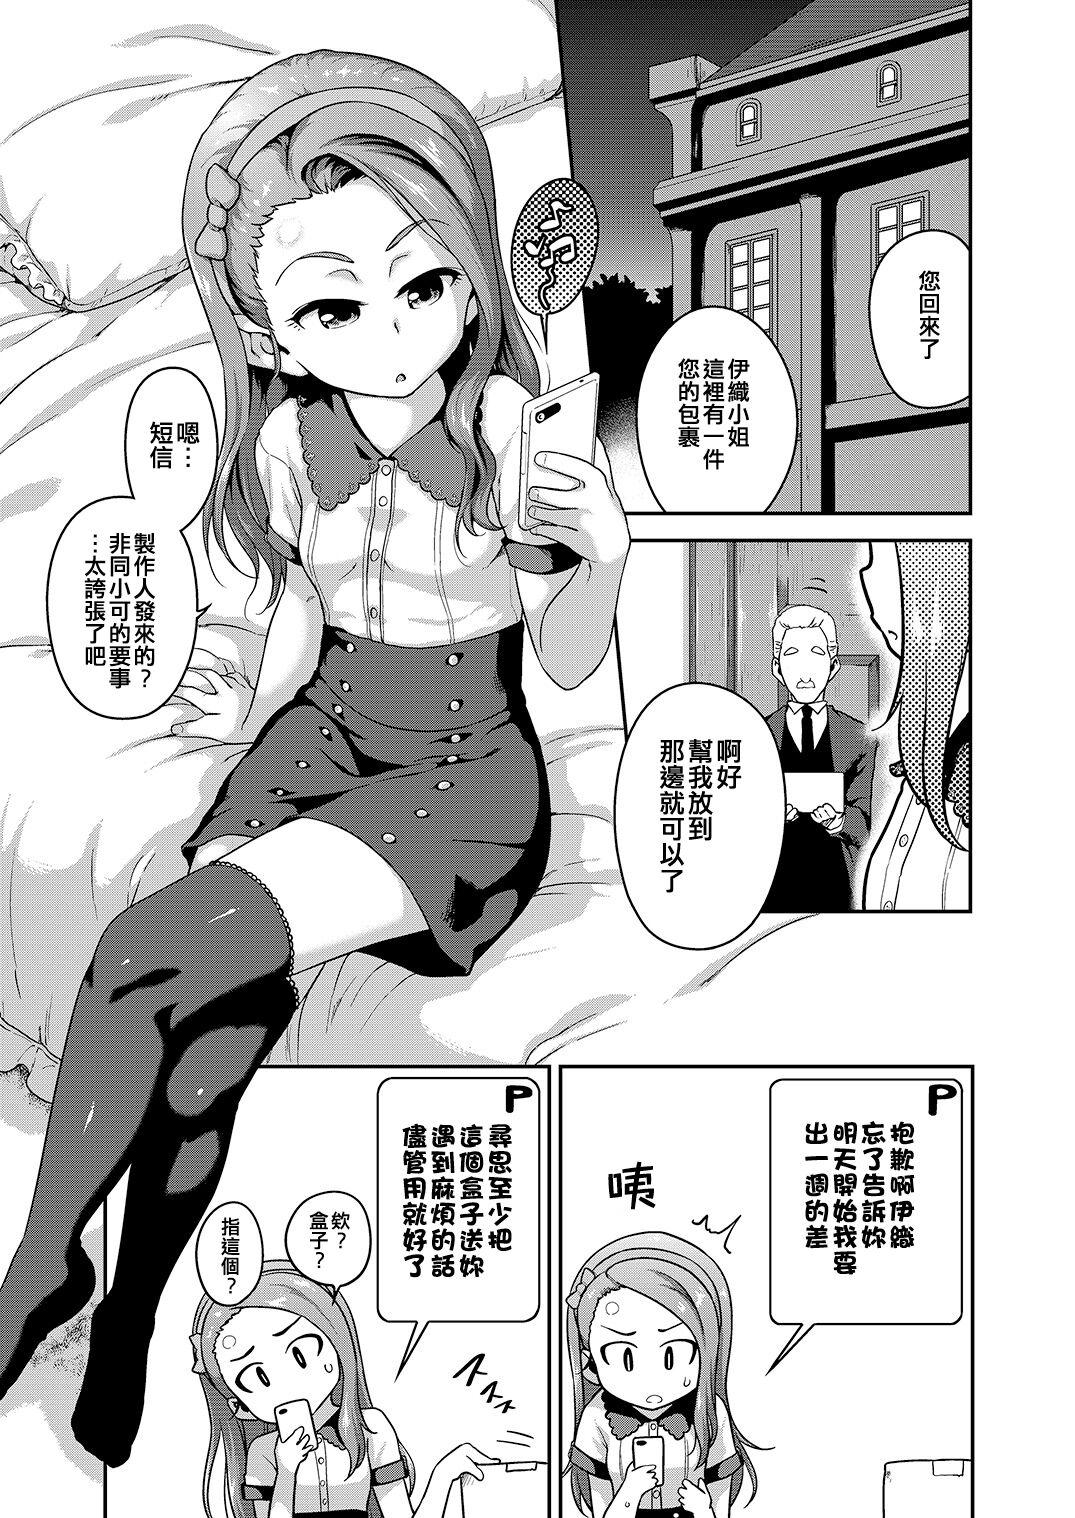 Ethnic Voo Voo Win Win - The idolmaster Analfuck - Page 3